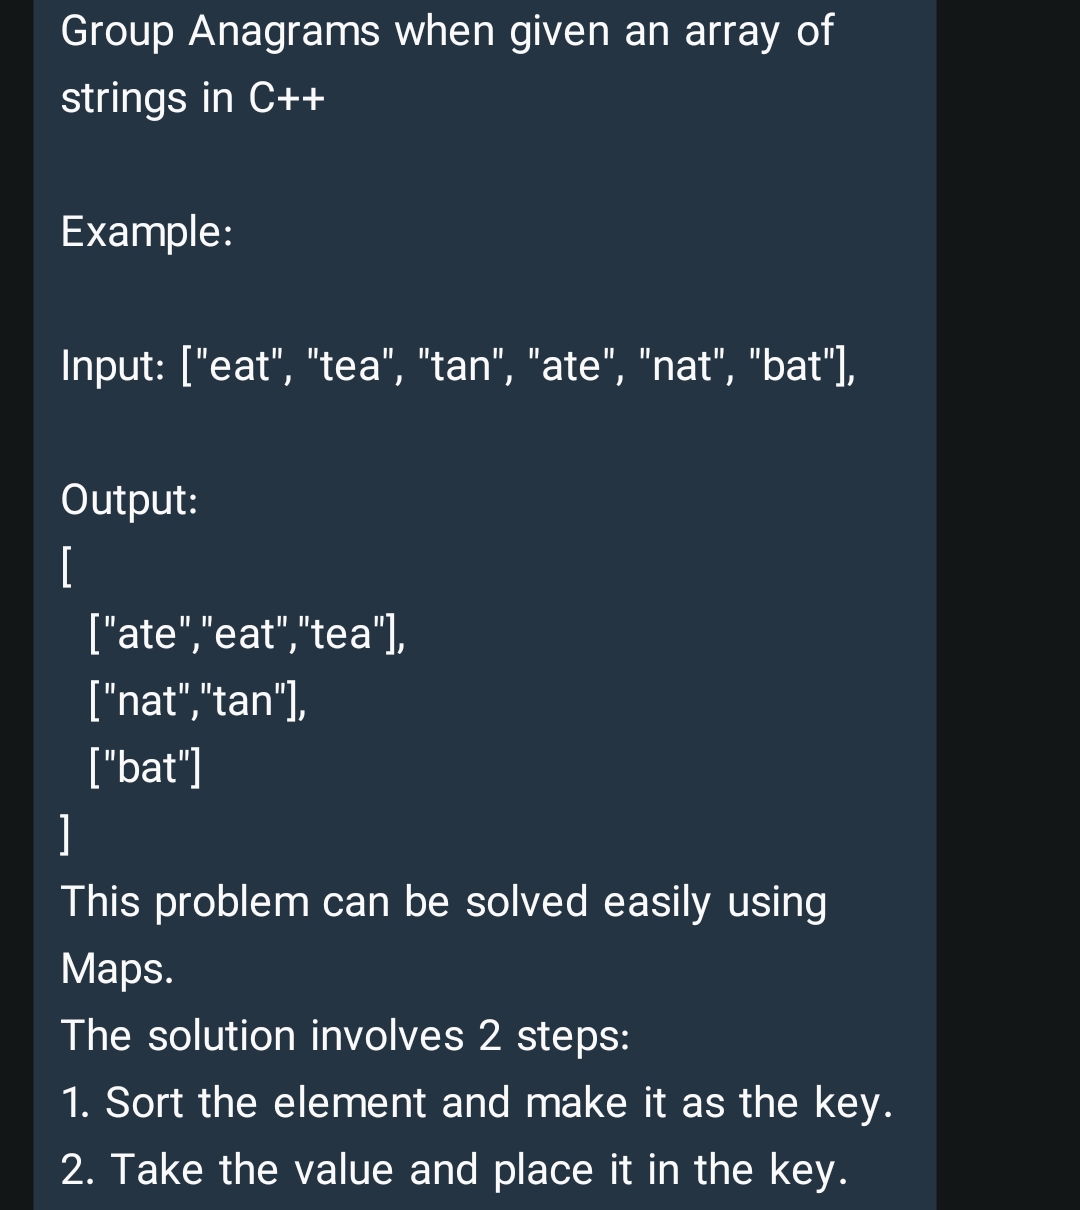 Group Anagrams when given an array of
strings in C++
Example:
Input: ["eat", "tea", "tan", "ate", "nat", "bat"],
Output:
[
["ate","eat","tea"],
["nat","tan"),
["bat"]
]
This problem can be solved easily using
Мaps.
The solution involves 2 steps:
1. Sort the element and make it as the key.
2. Take the value and place it in the key.
